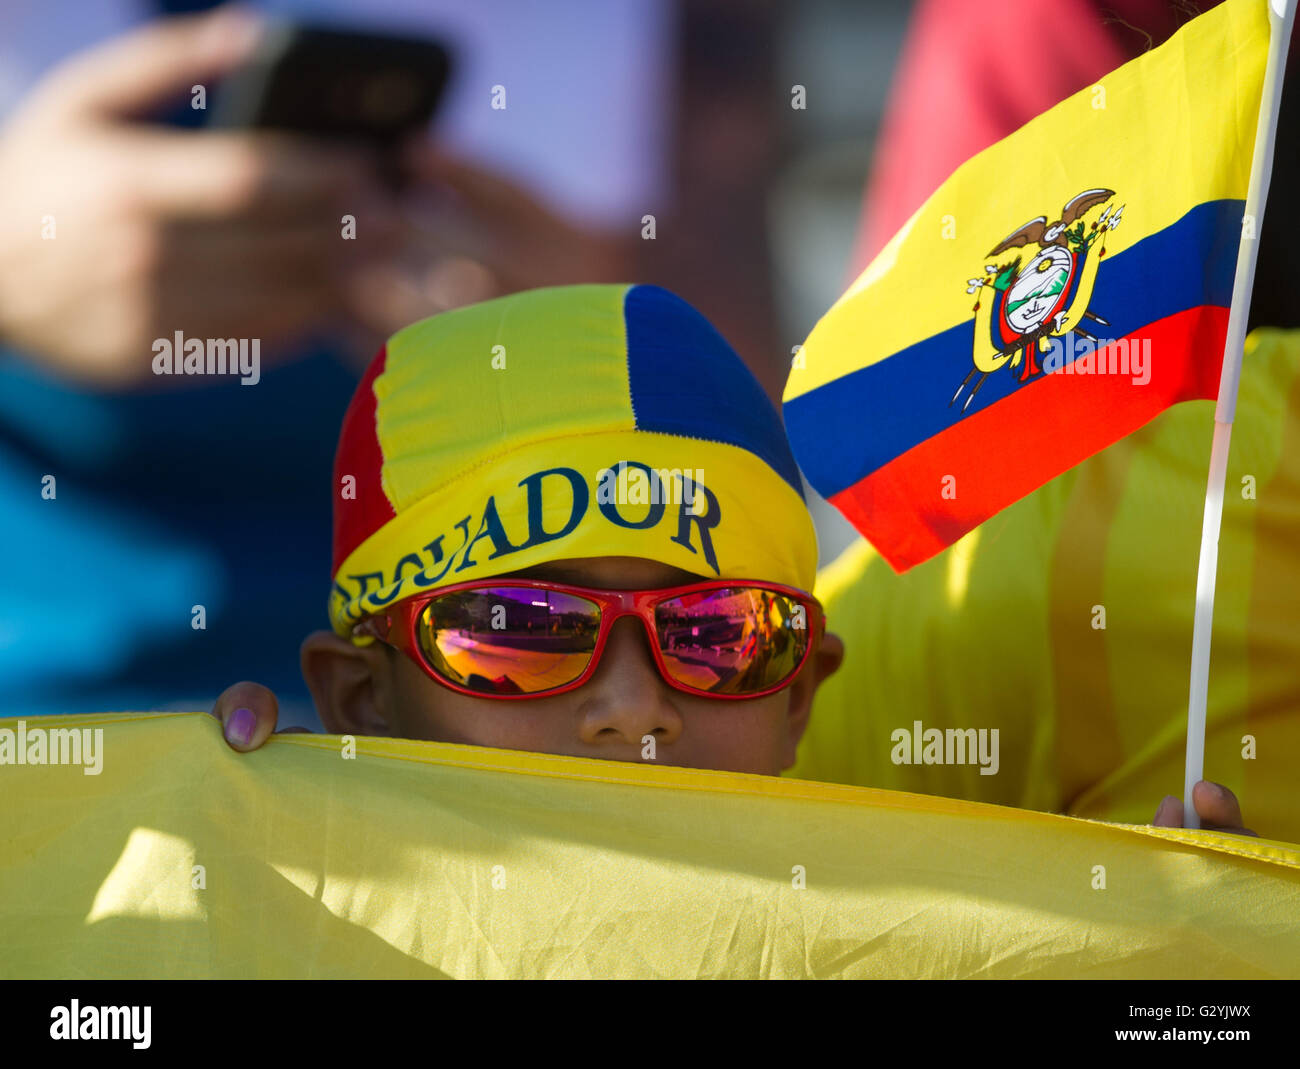 Pasadena, USA. 4th June, 2016. A supporter of Ecuador is seen ahead of the 2016 Copa America Centenario Group B match against Brazil in Pasadena, the United States, June 4, 2016. The match ended with a 0-0 draw. © Yang Lei/Xinhua/Alamy Live News Stock Photo